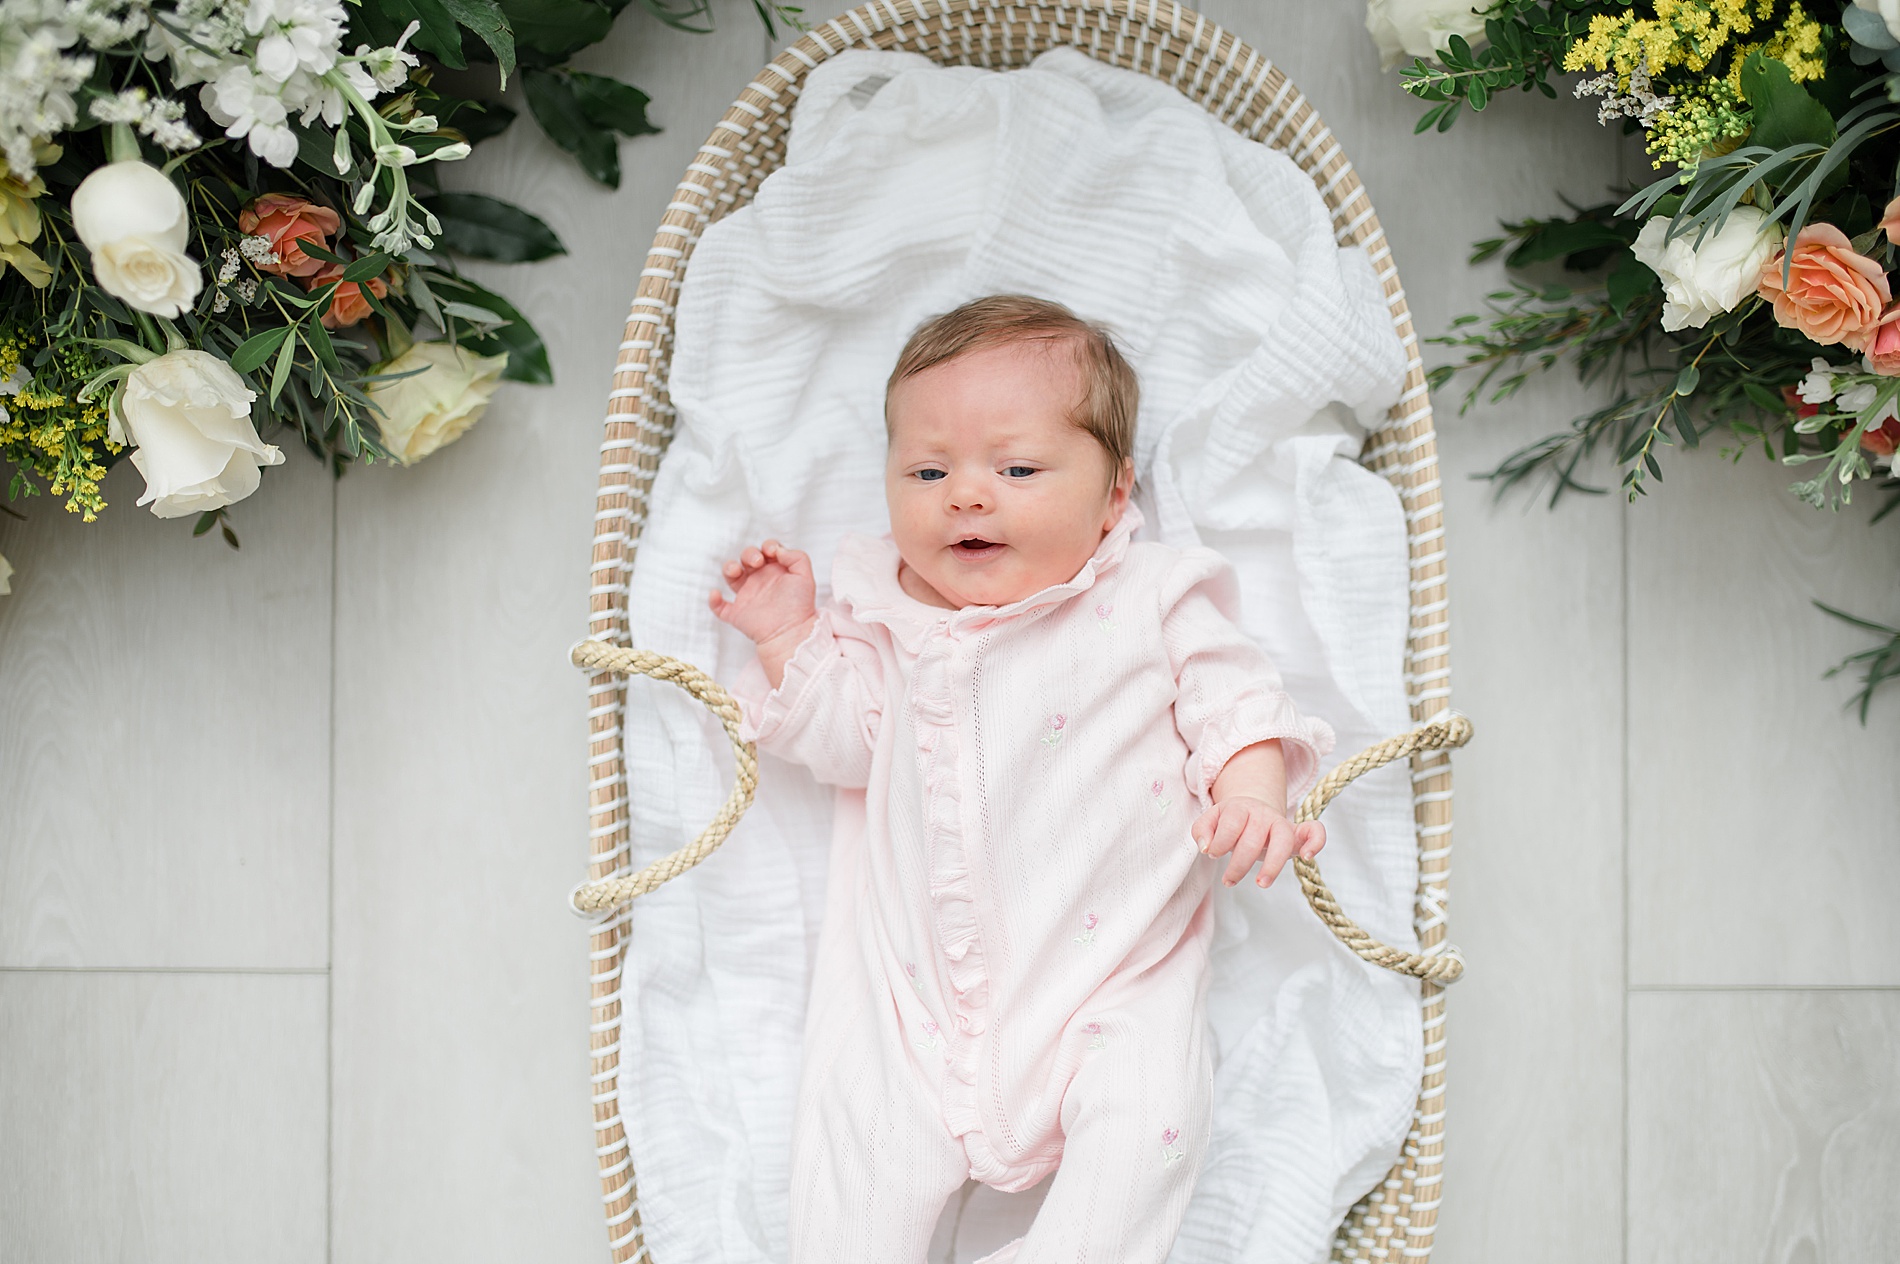 newborn girl in basket photographed by Lindsey Dutton Photography, a Dallas Newborn photographer